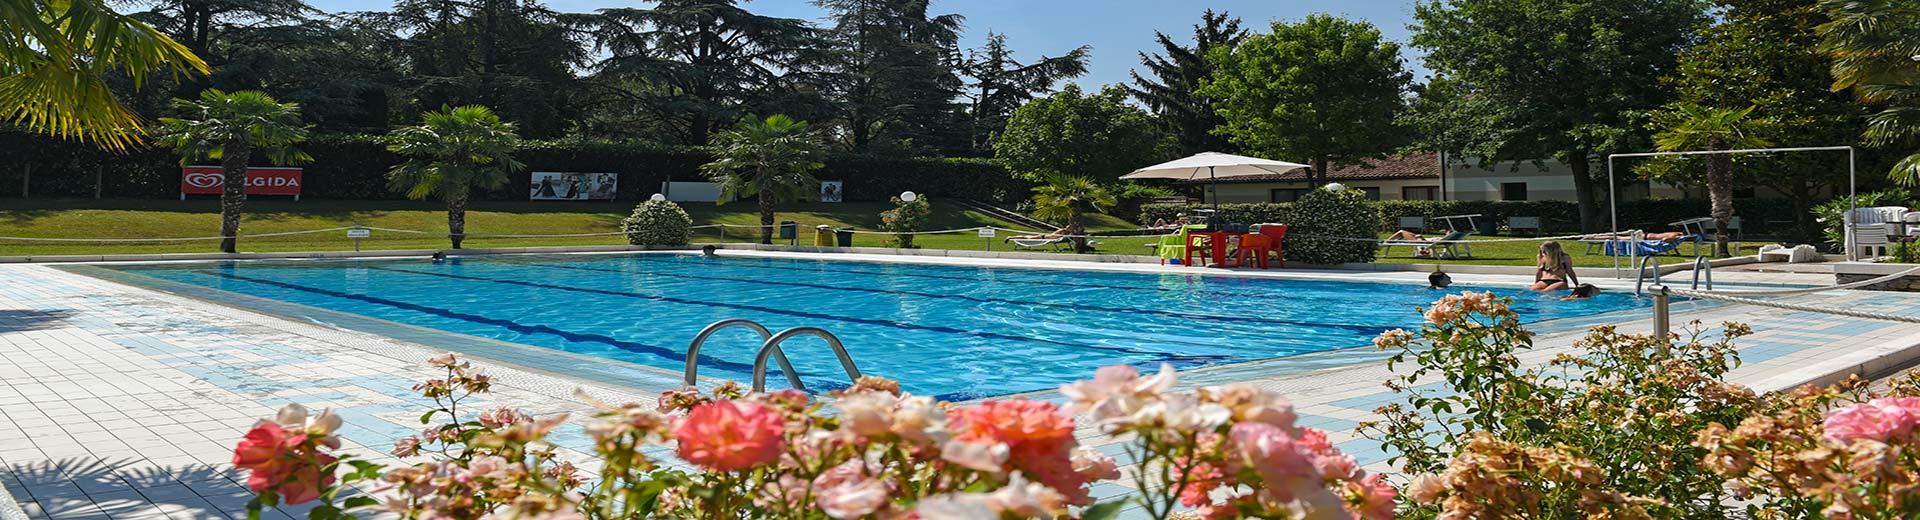 The hotel guests can use the outdoor pools Green Club for free